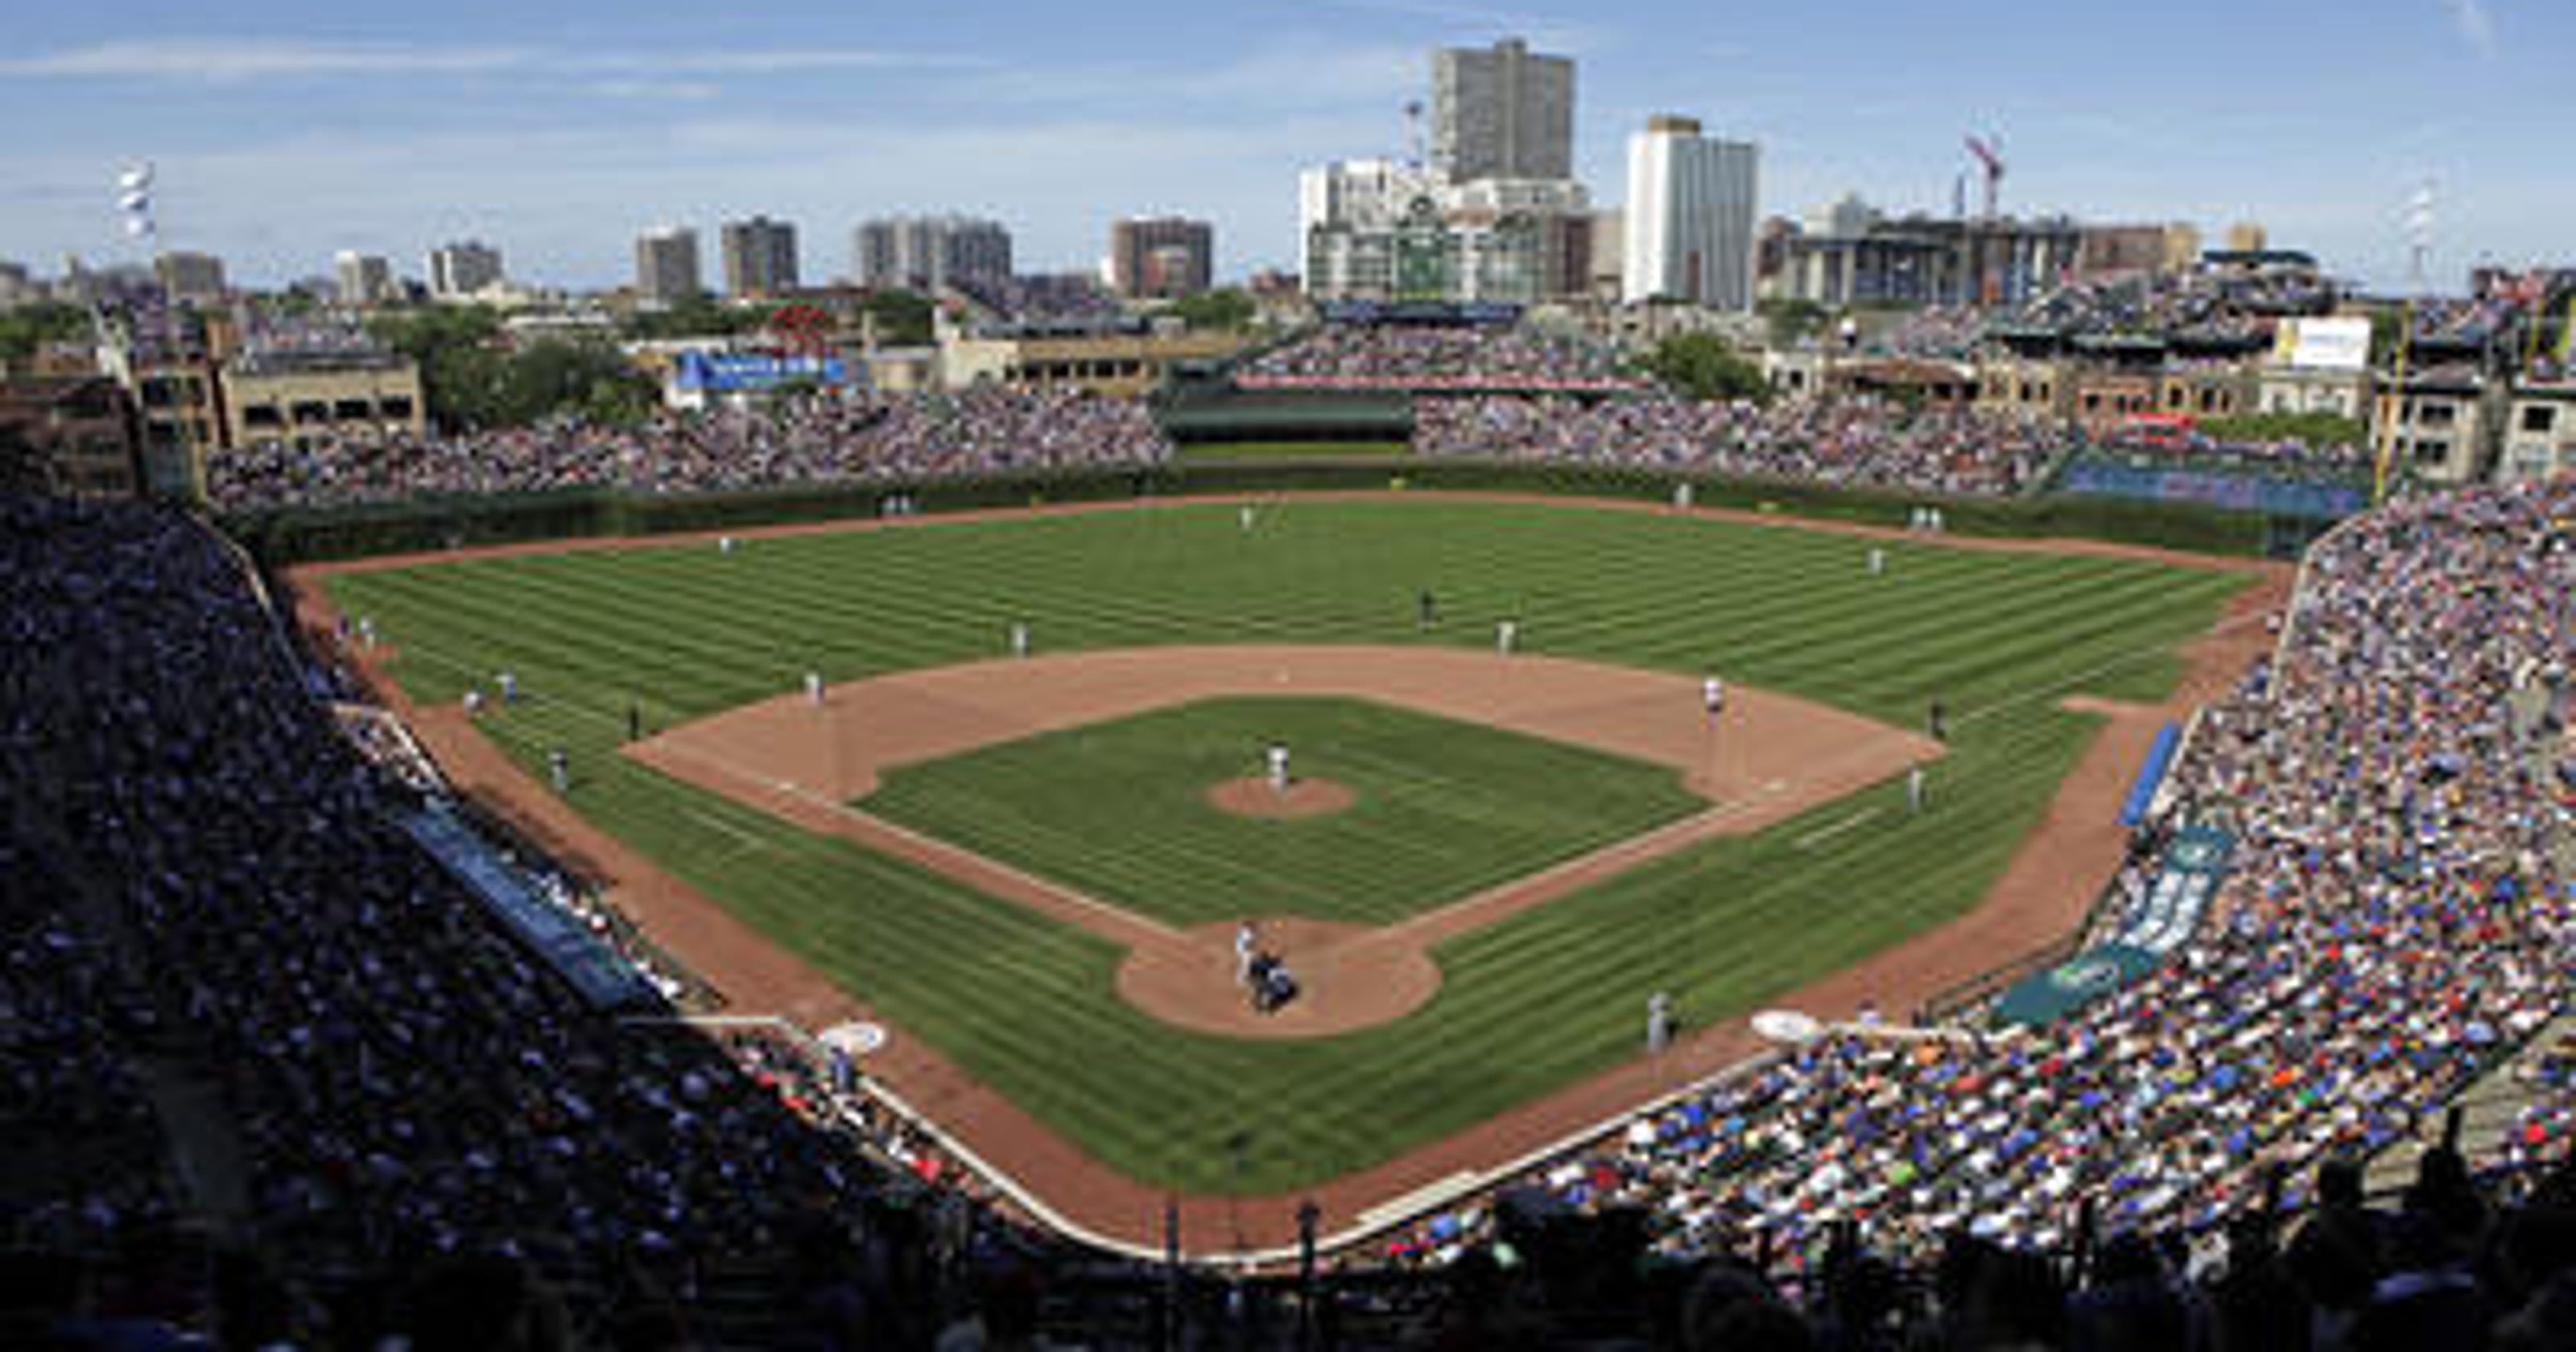 Wrigley Field S 100th Anniversary Sparks Nostalgic Stadium Thoughts